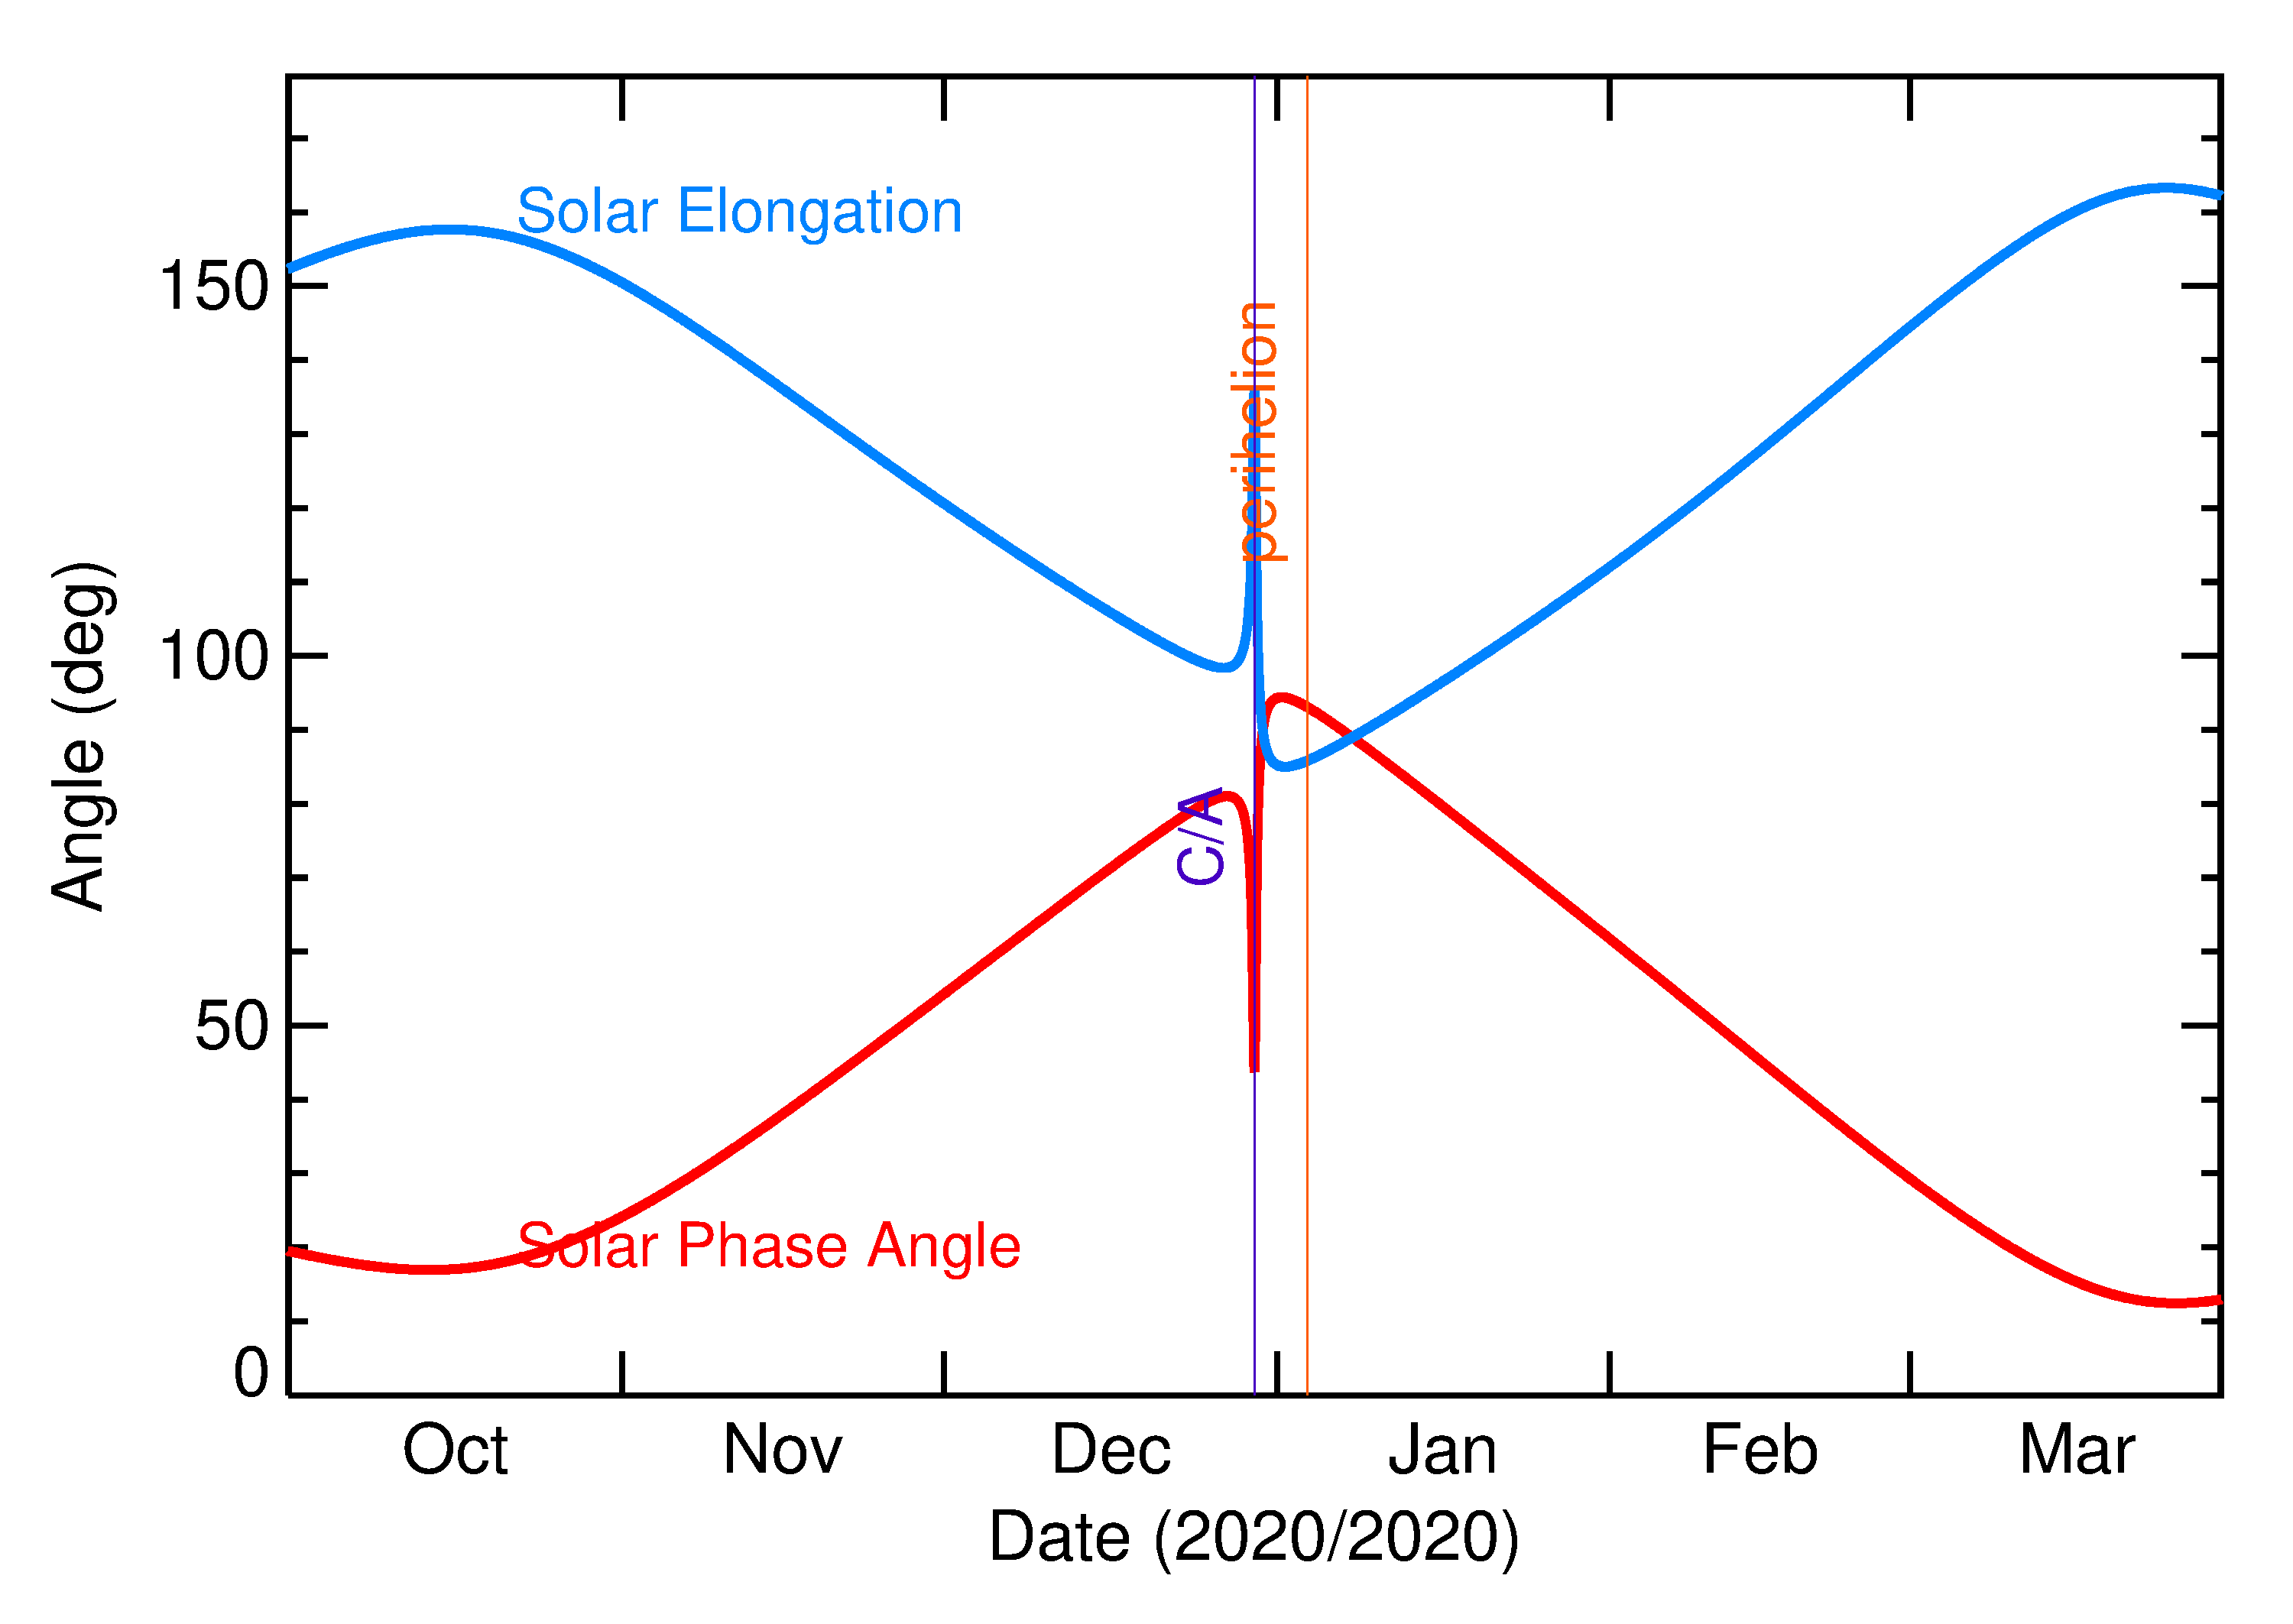 Solar Elongation and Solar Phase Angle of 2020 YS4 in the months around closest approach